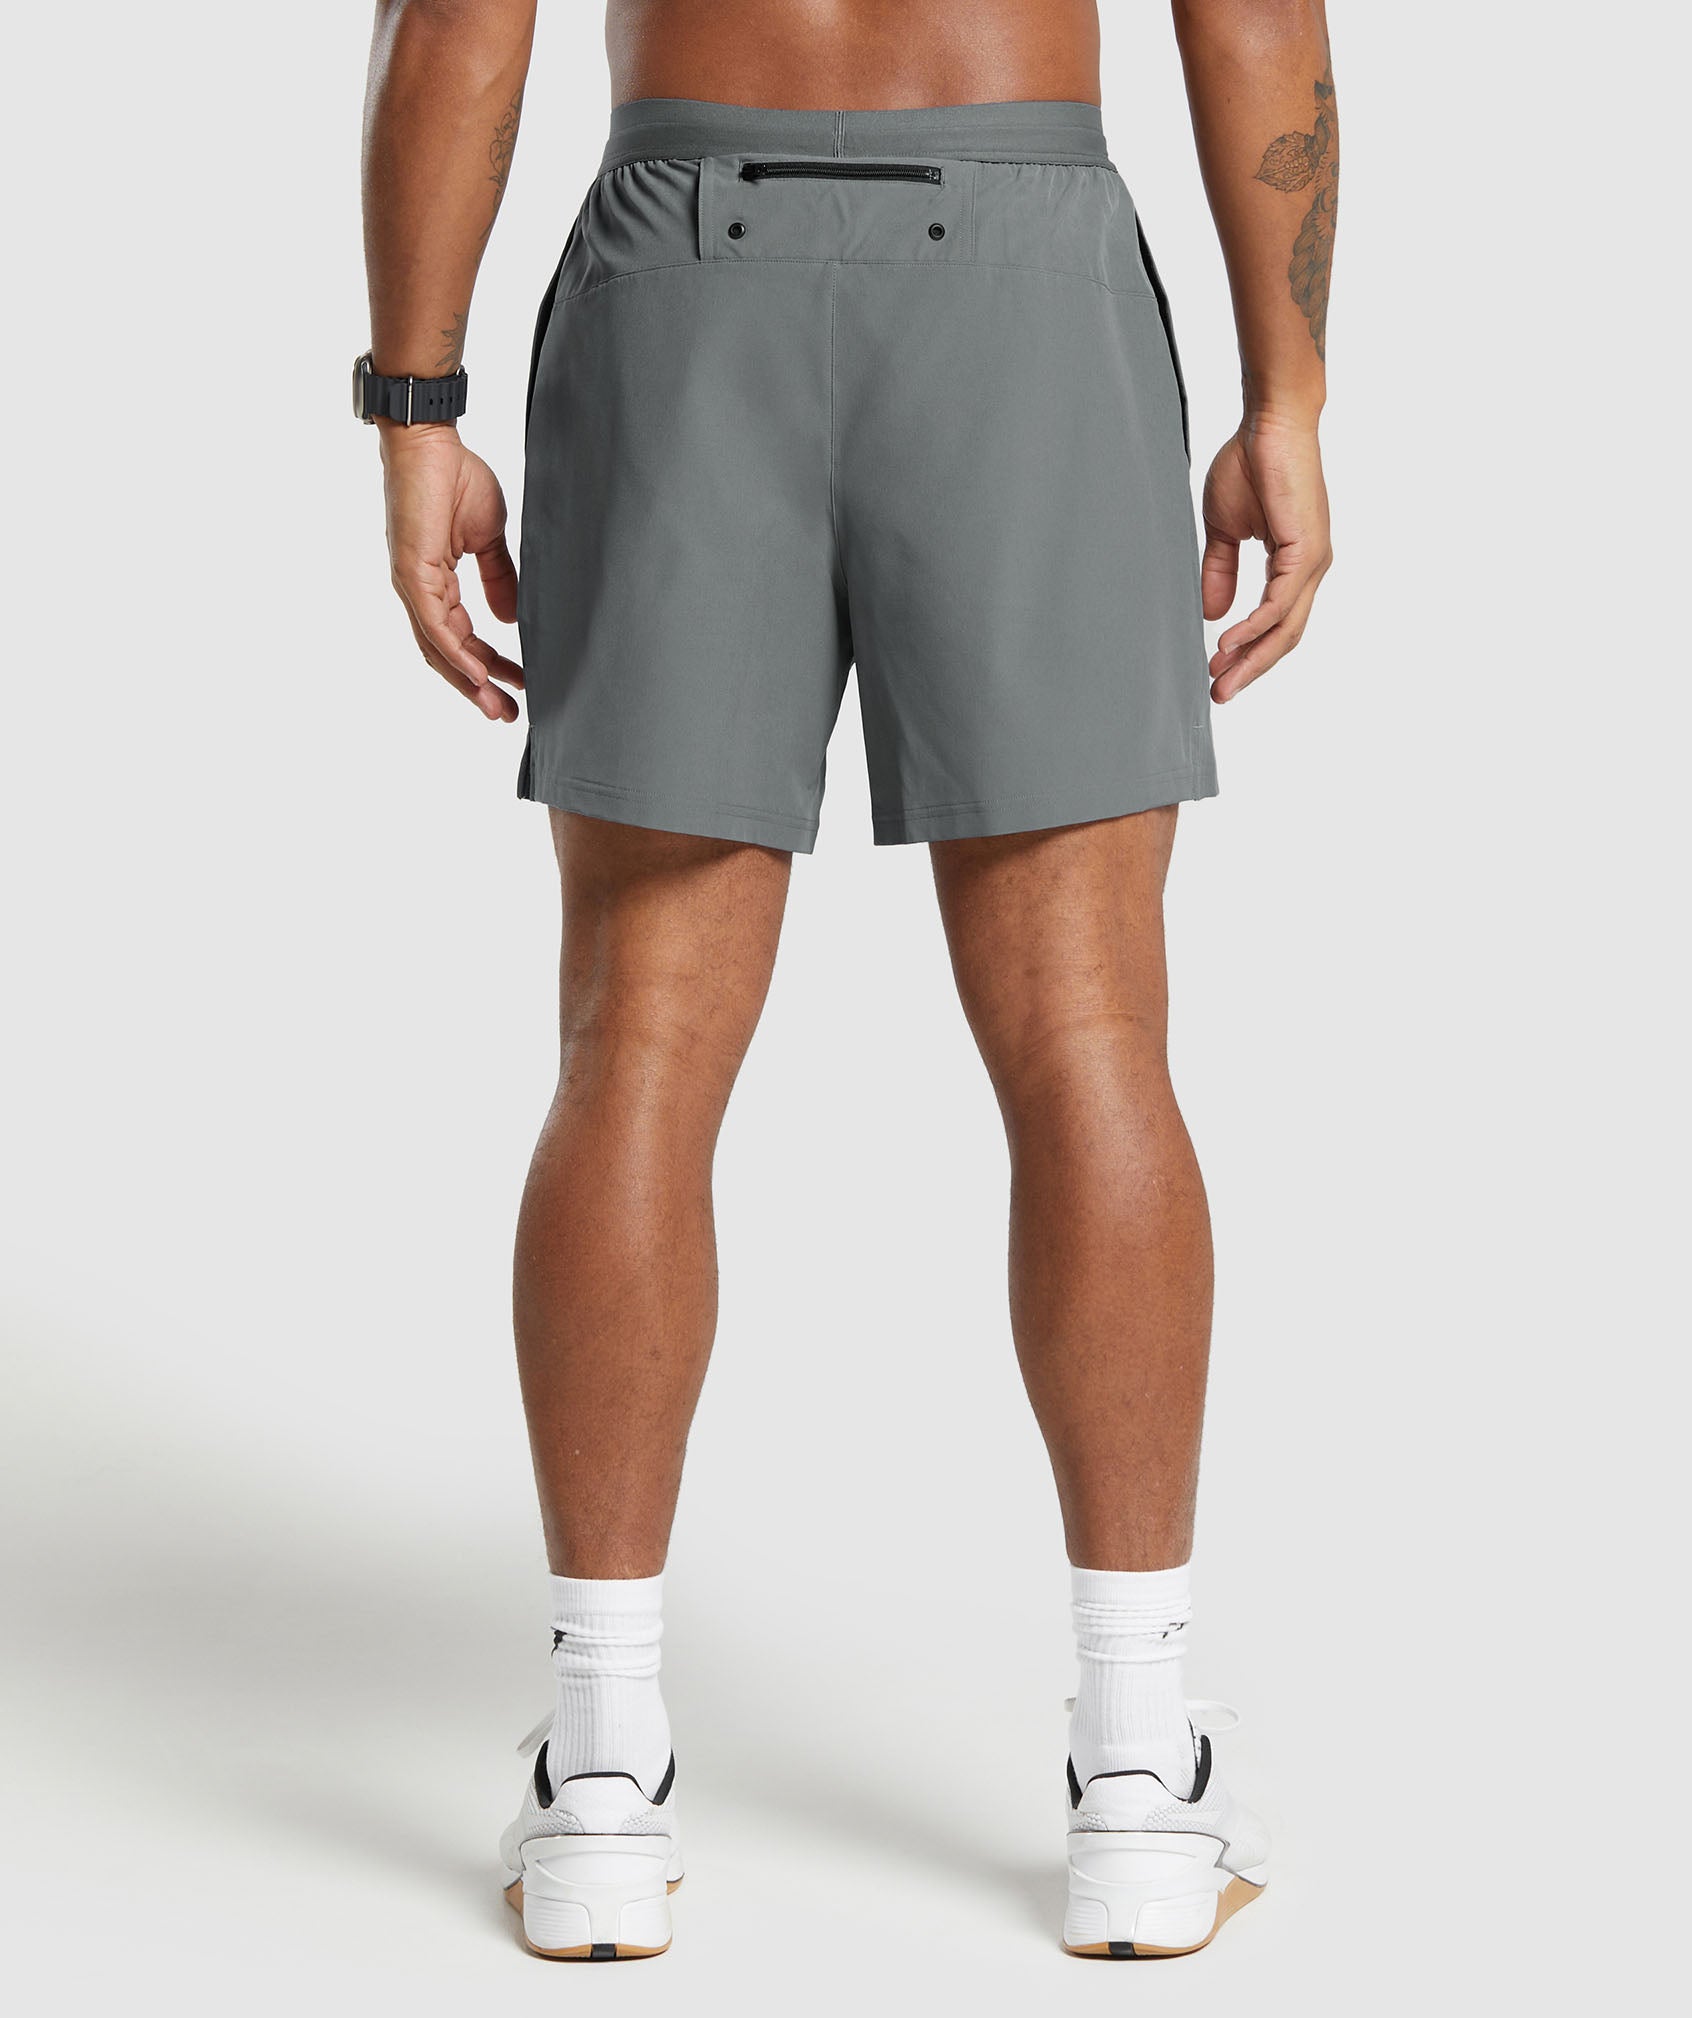 Land to Water 6" Shorts in Pitch Grey - view 2